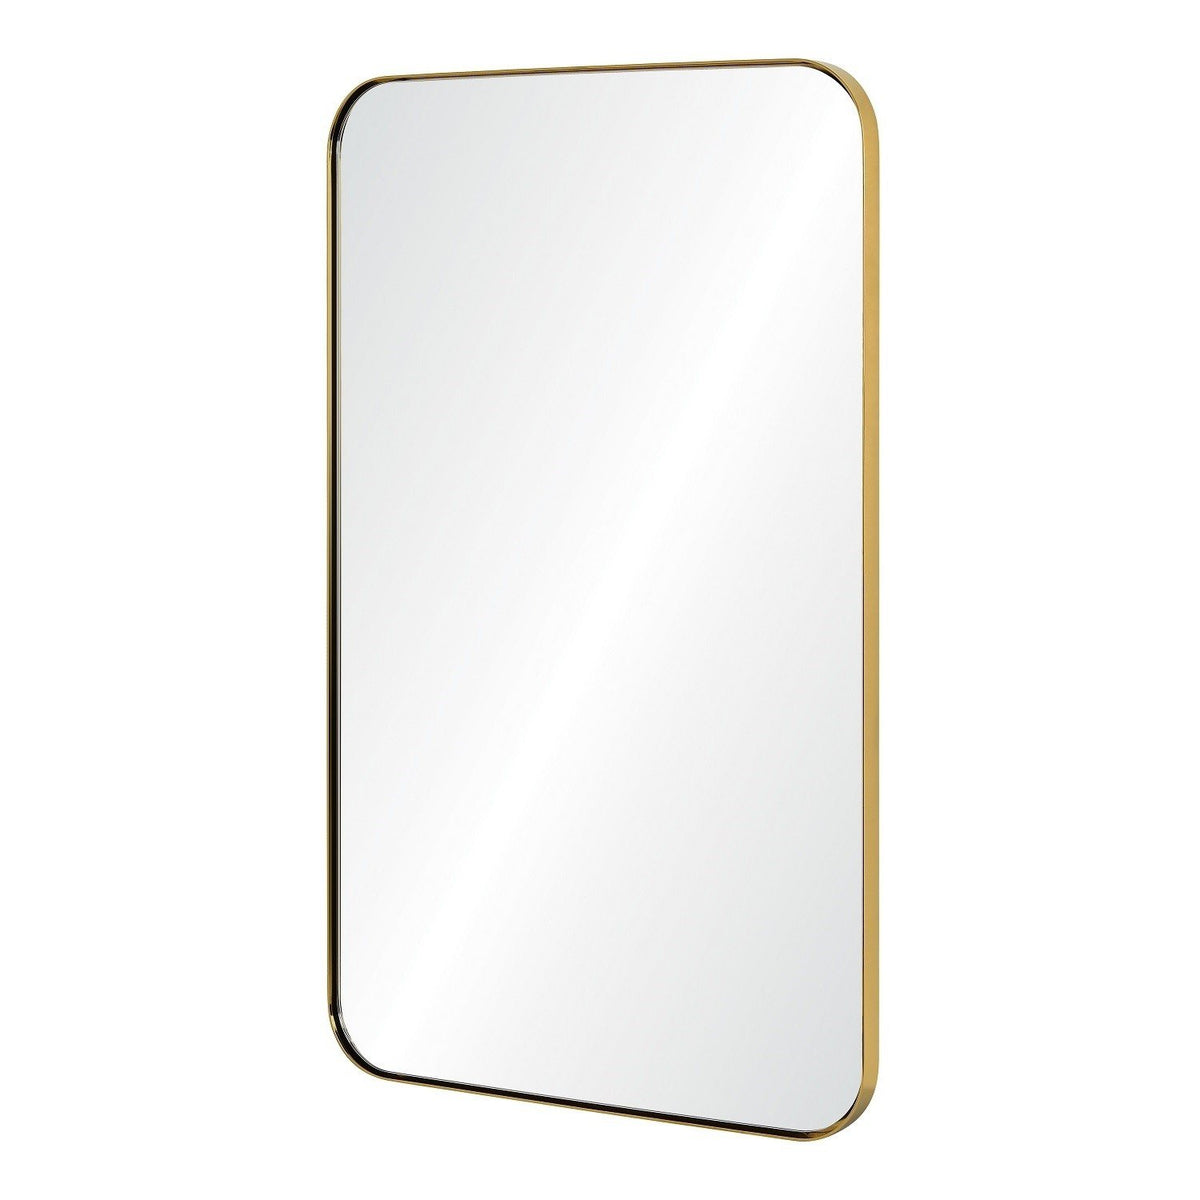 Fig Linens - Mirror Image Home - Burnished Brass Wall Mirror with Rounded Corners